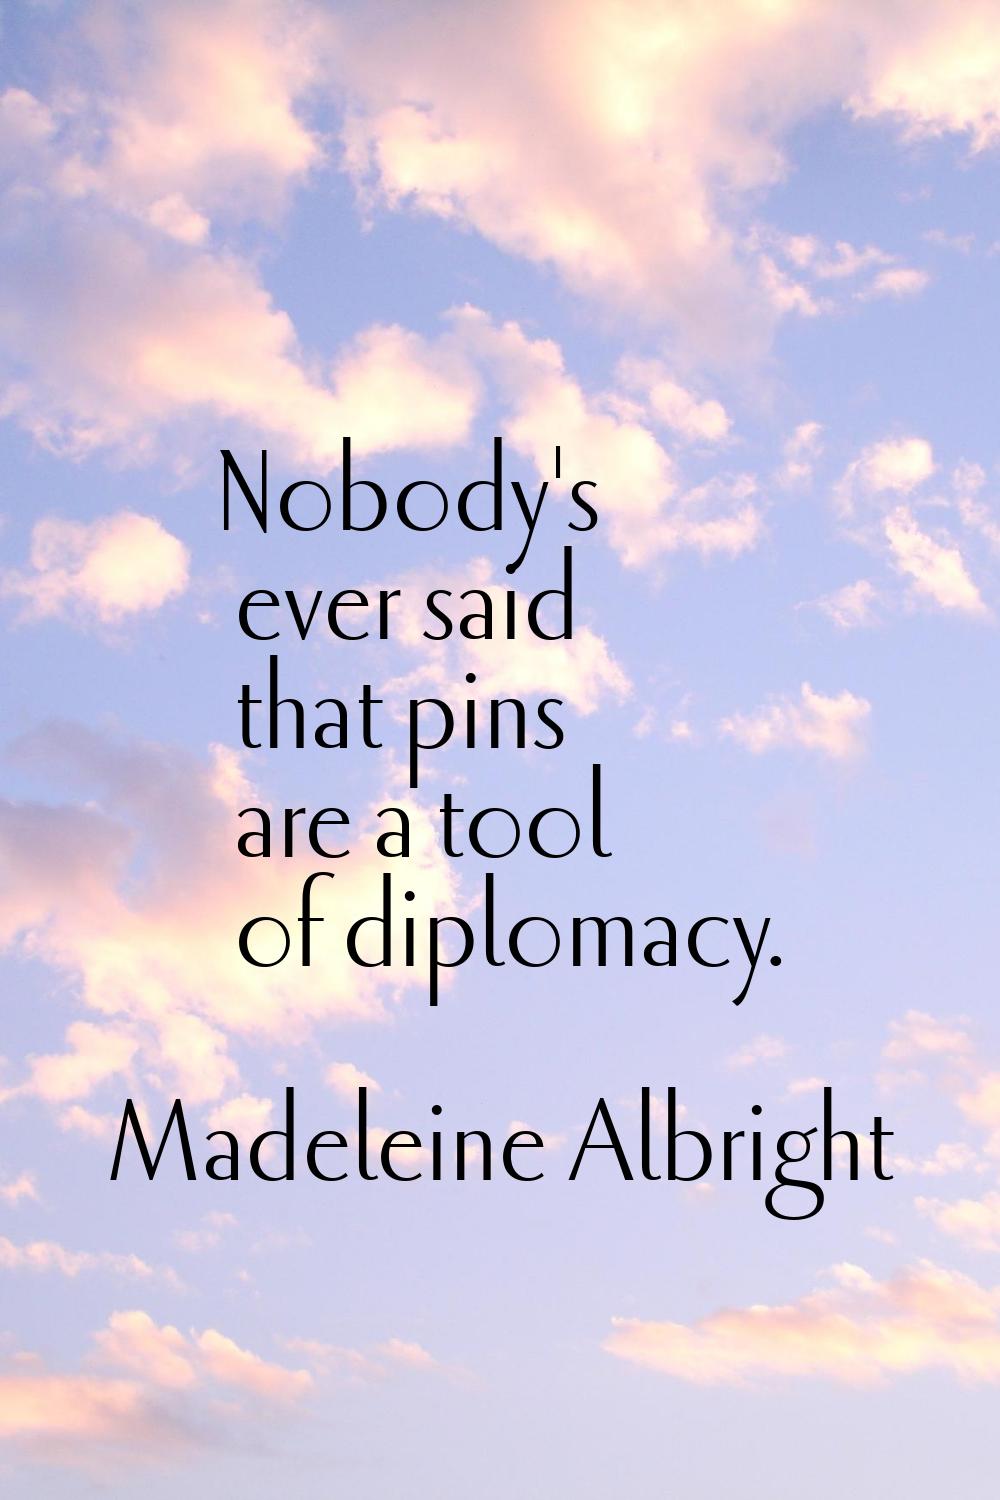 Nobody's ever said that pins are a tool of diplomacy.